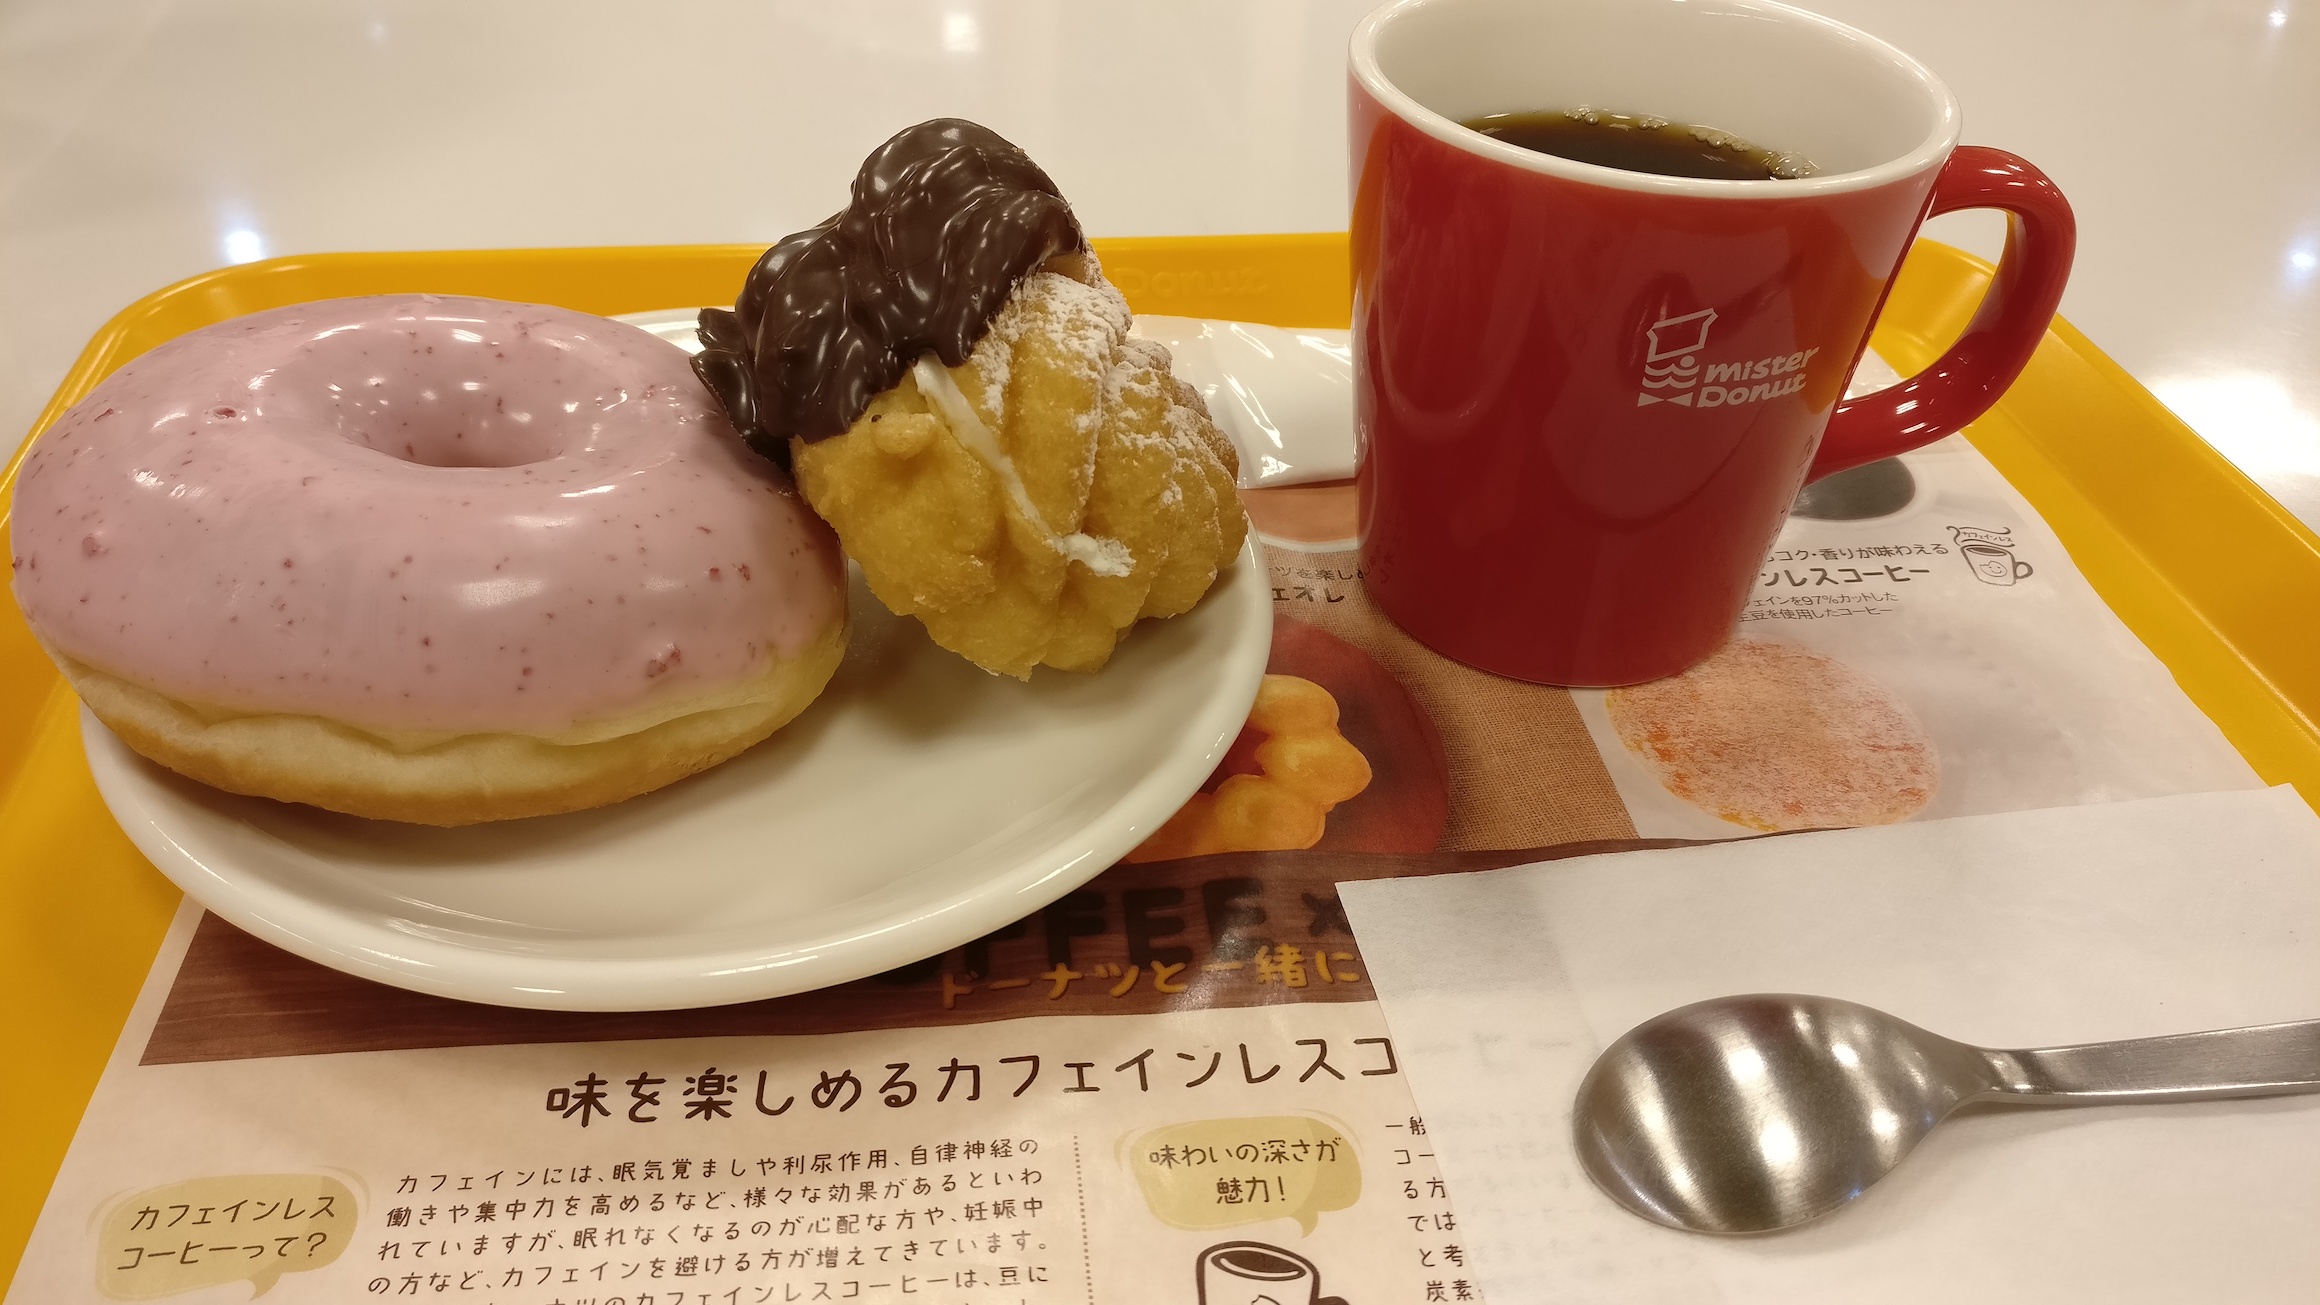 Donuts and coffee from Mister Donut